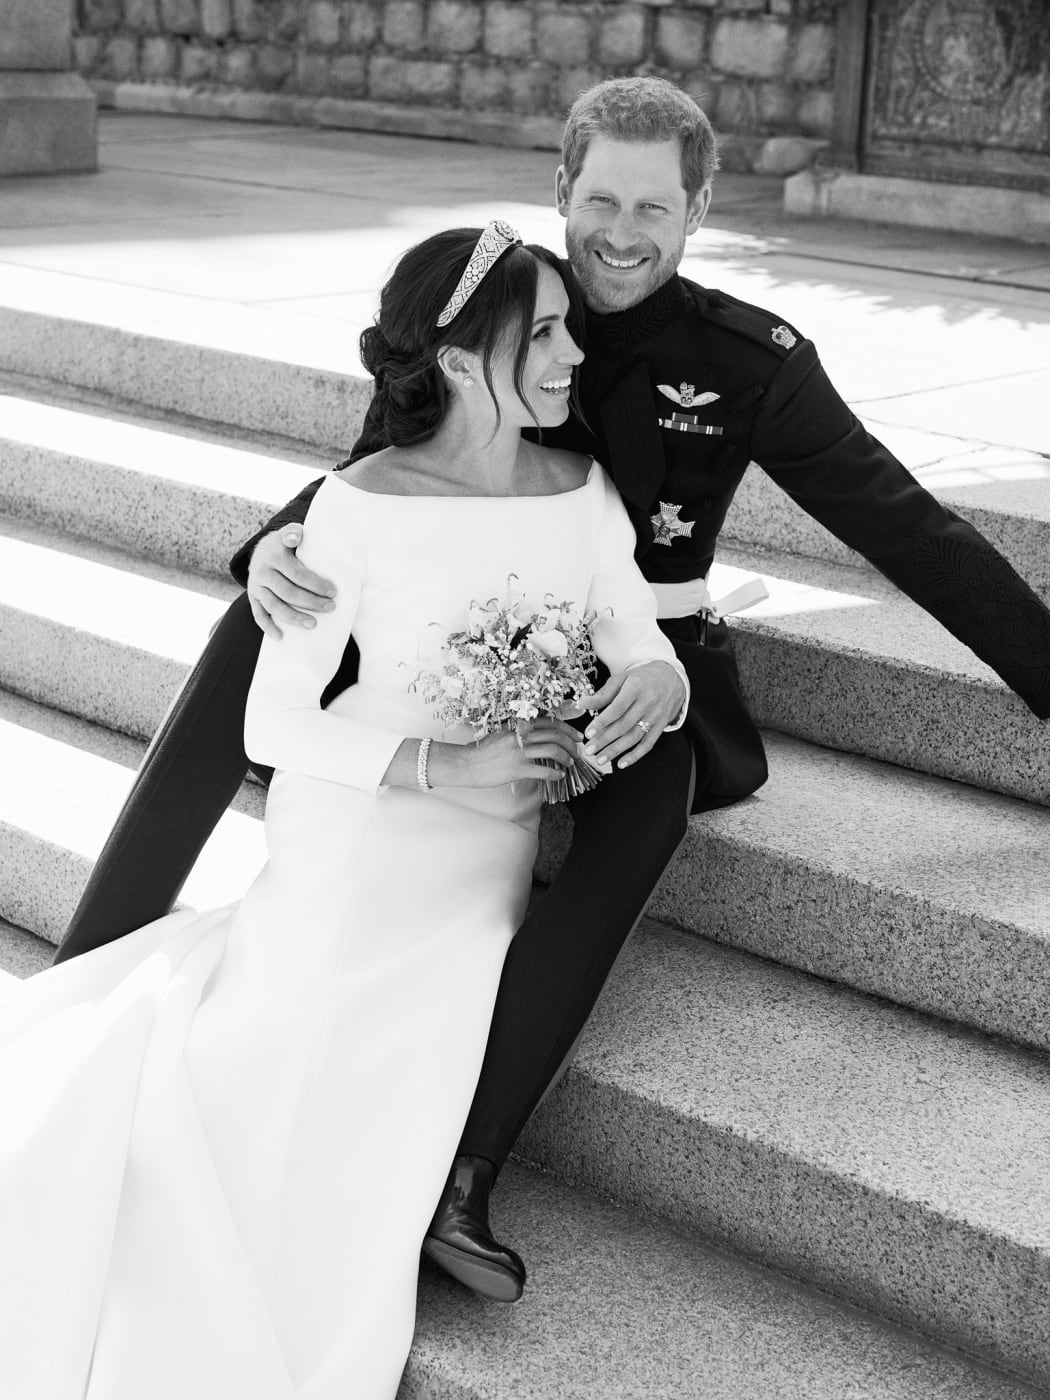 The Duke and Duchess of Sussex in one of three official photographs.